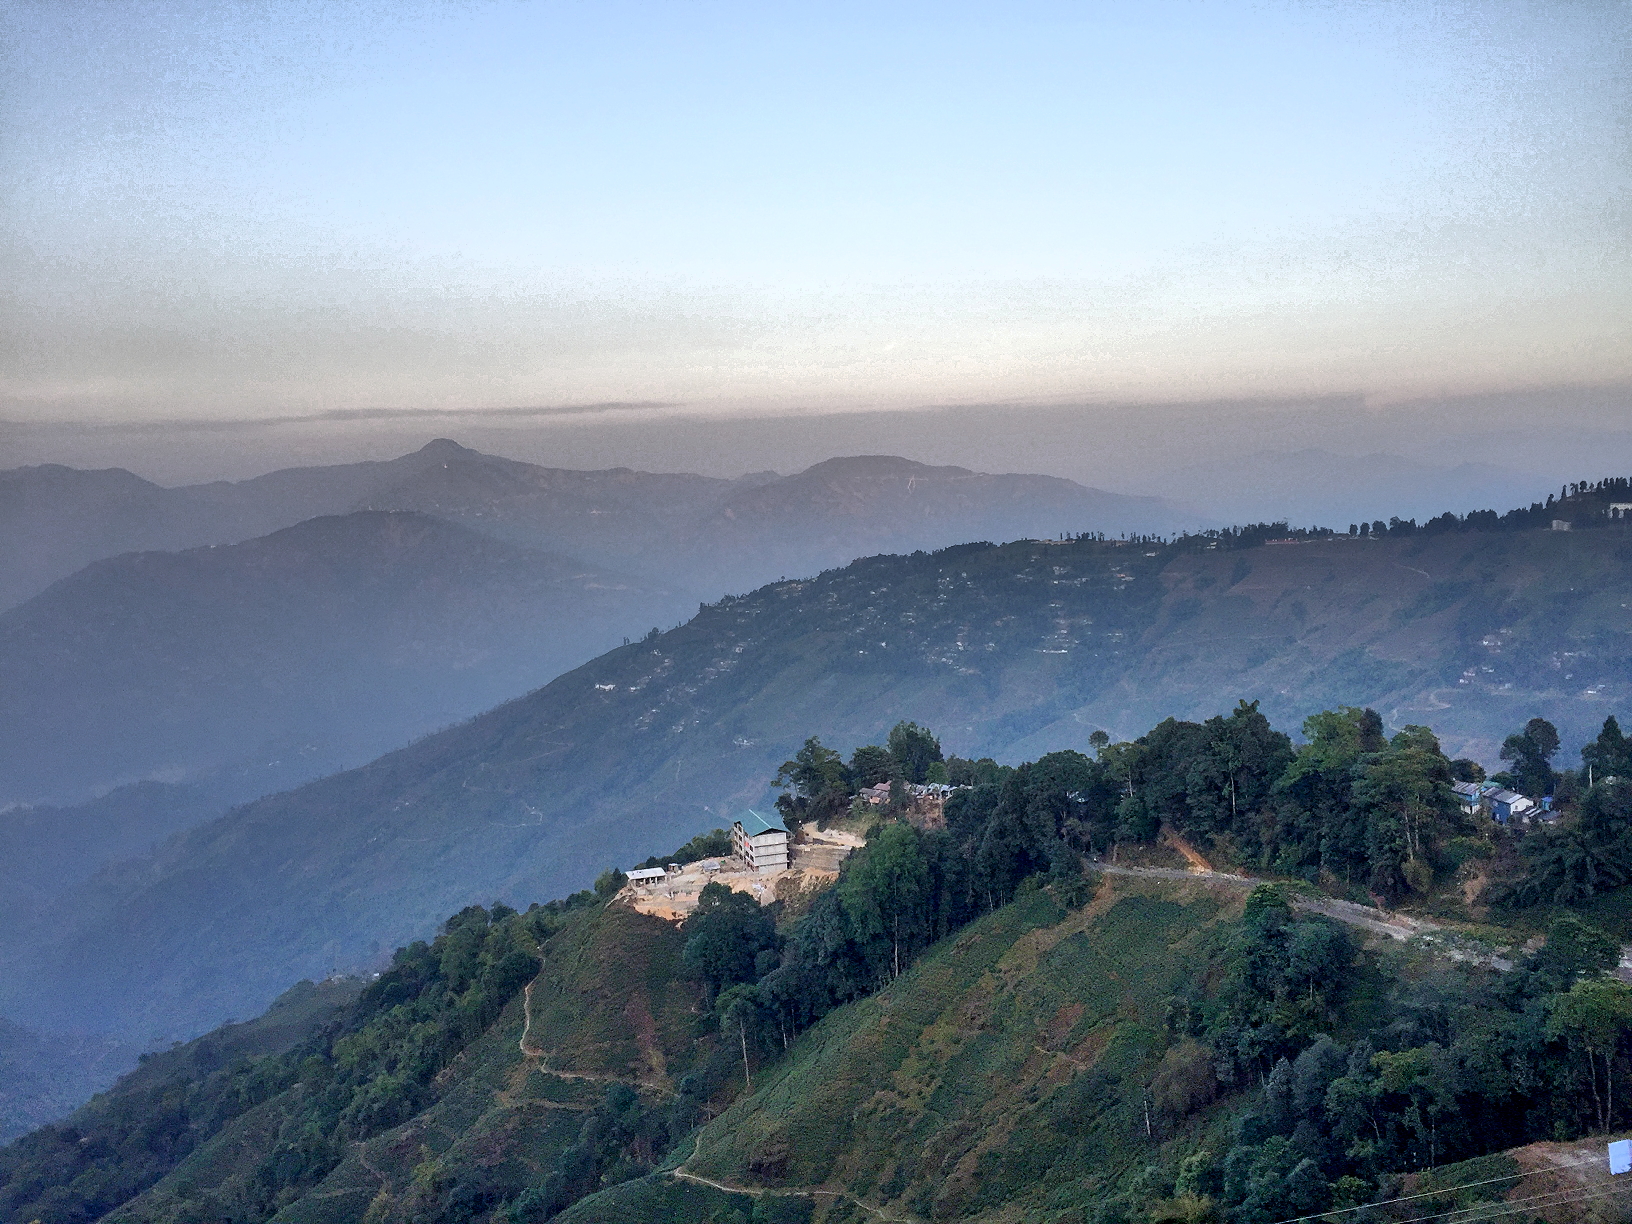 Darjeeling- A tale of tail-coats, tea-gardens and tall ‘tains